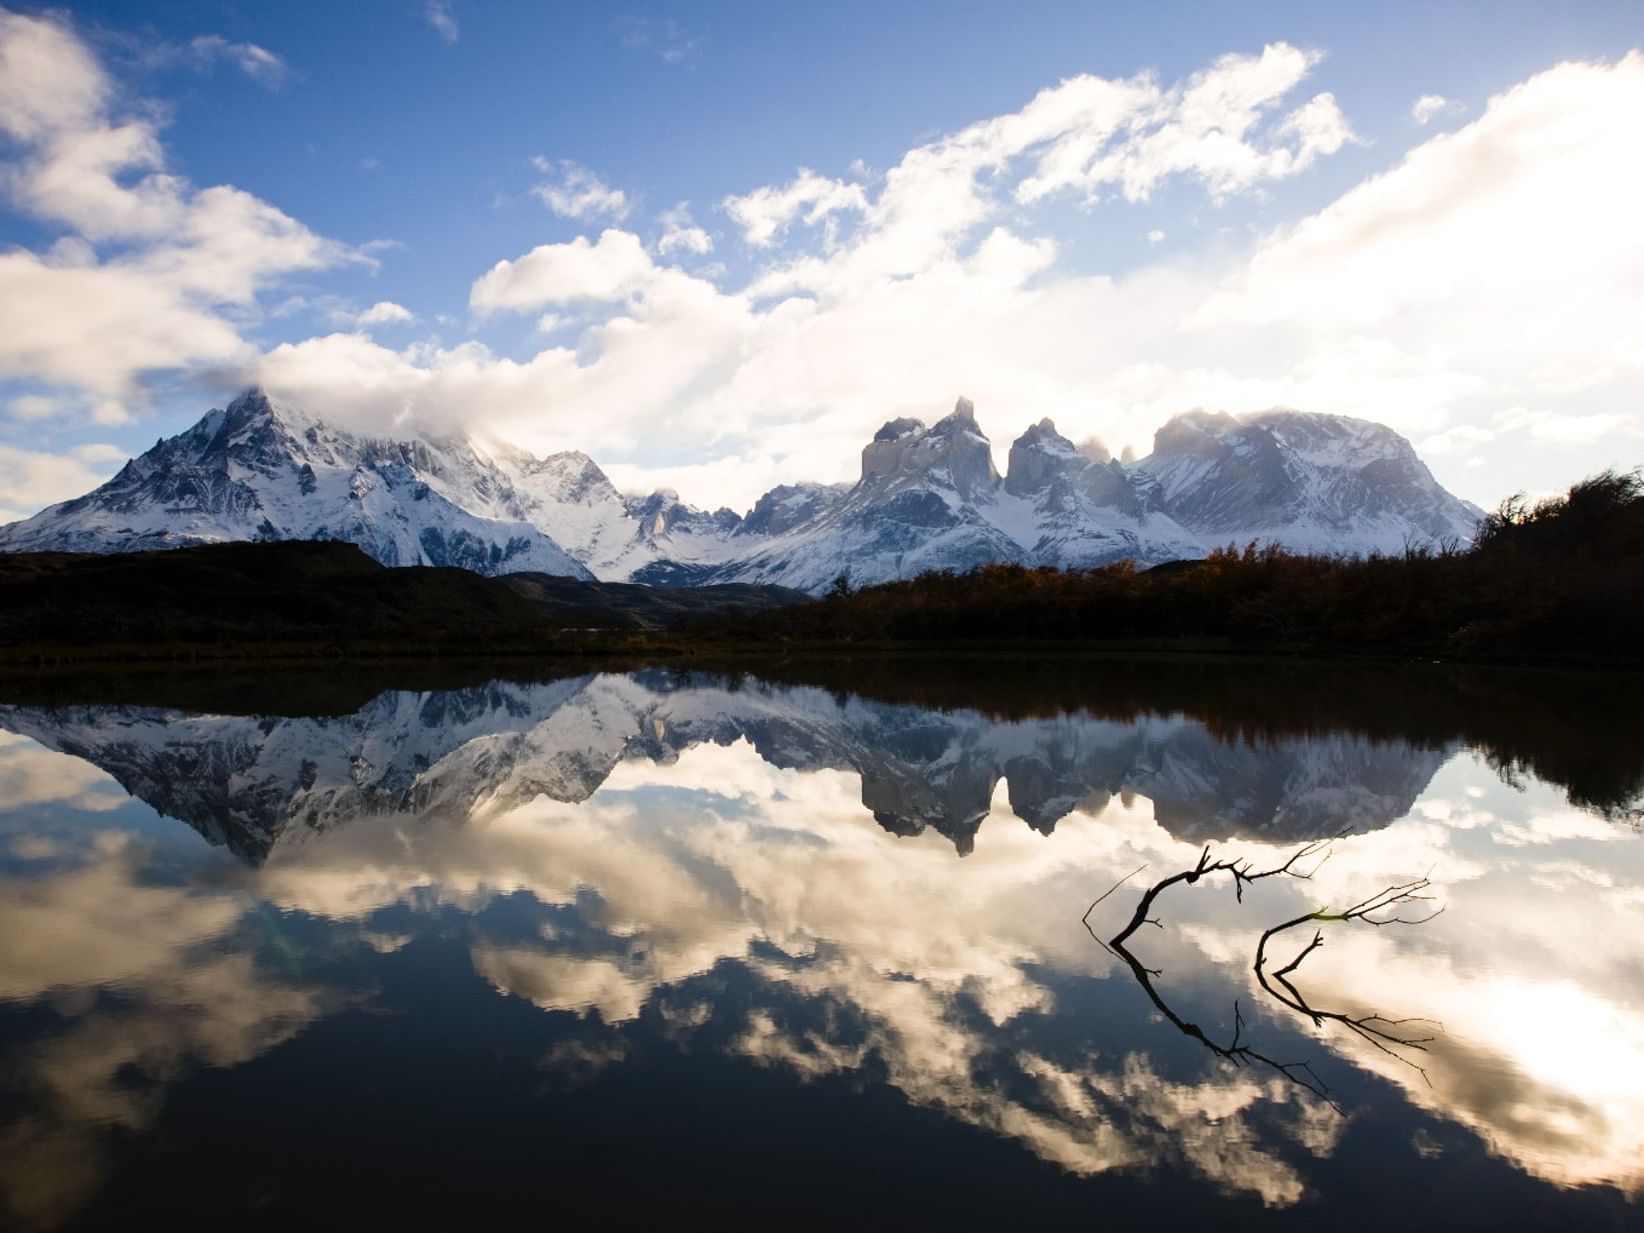 Torres del Paine National Park near The Singular Patagonia